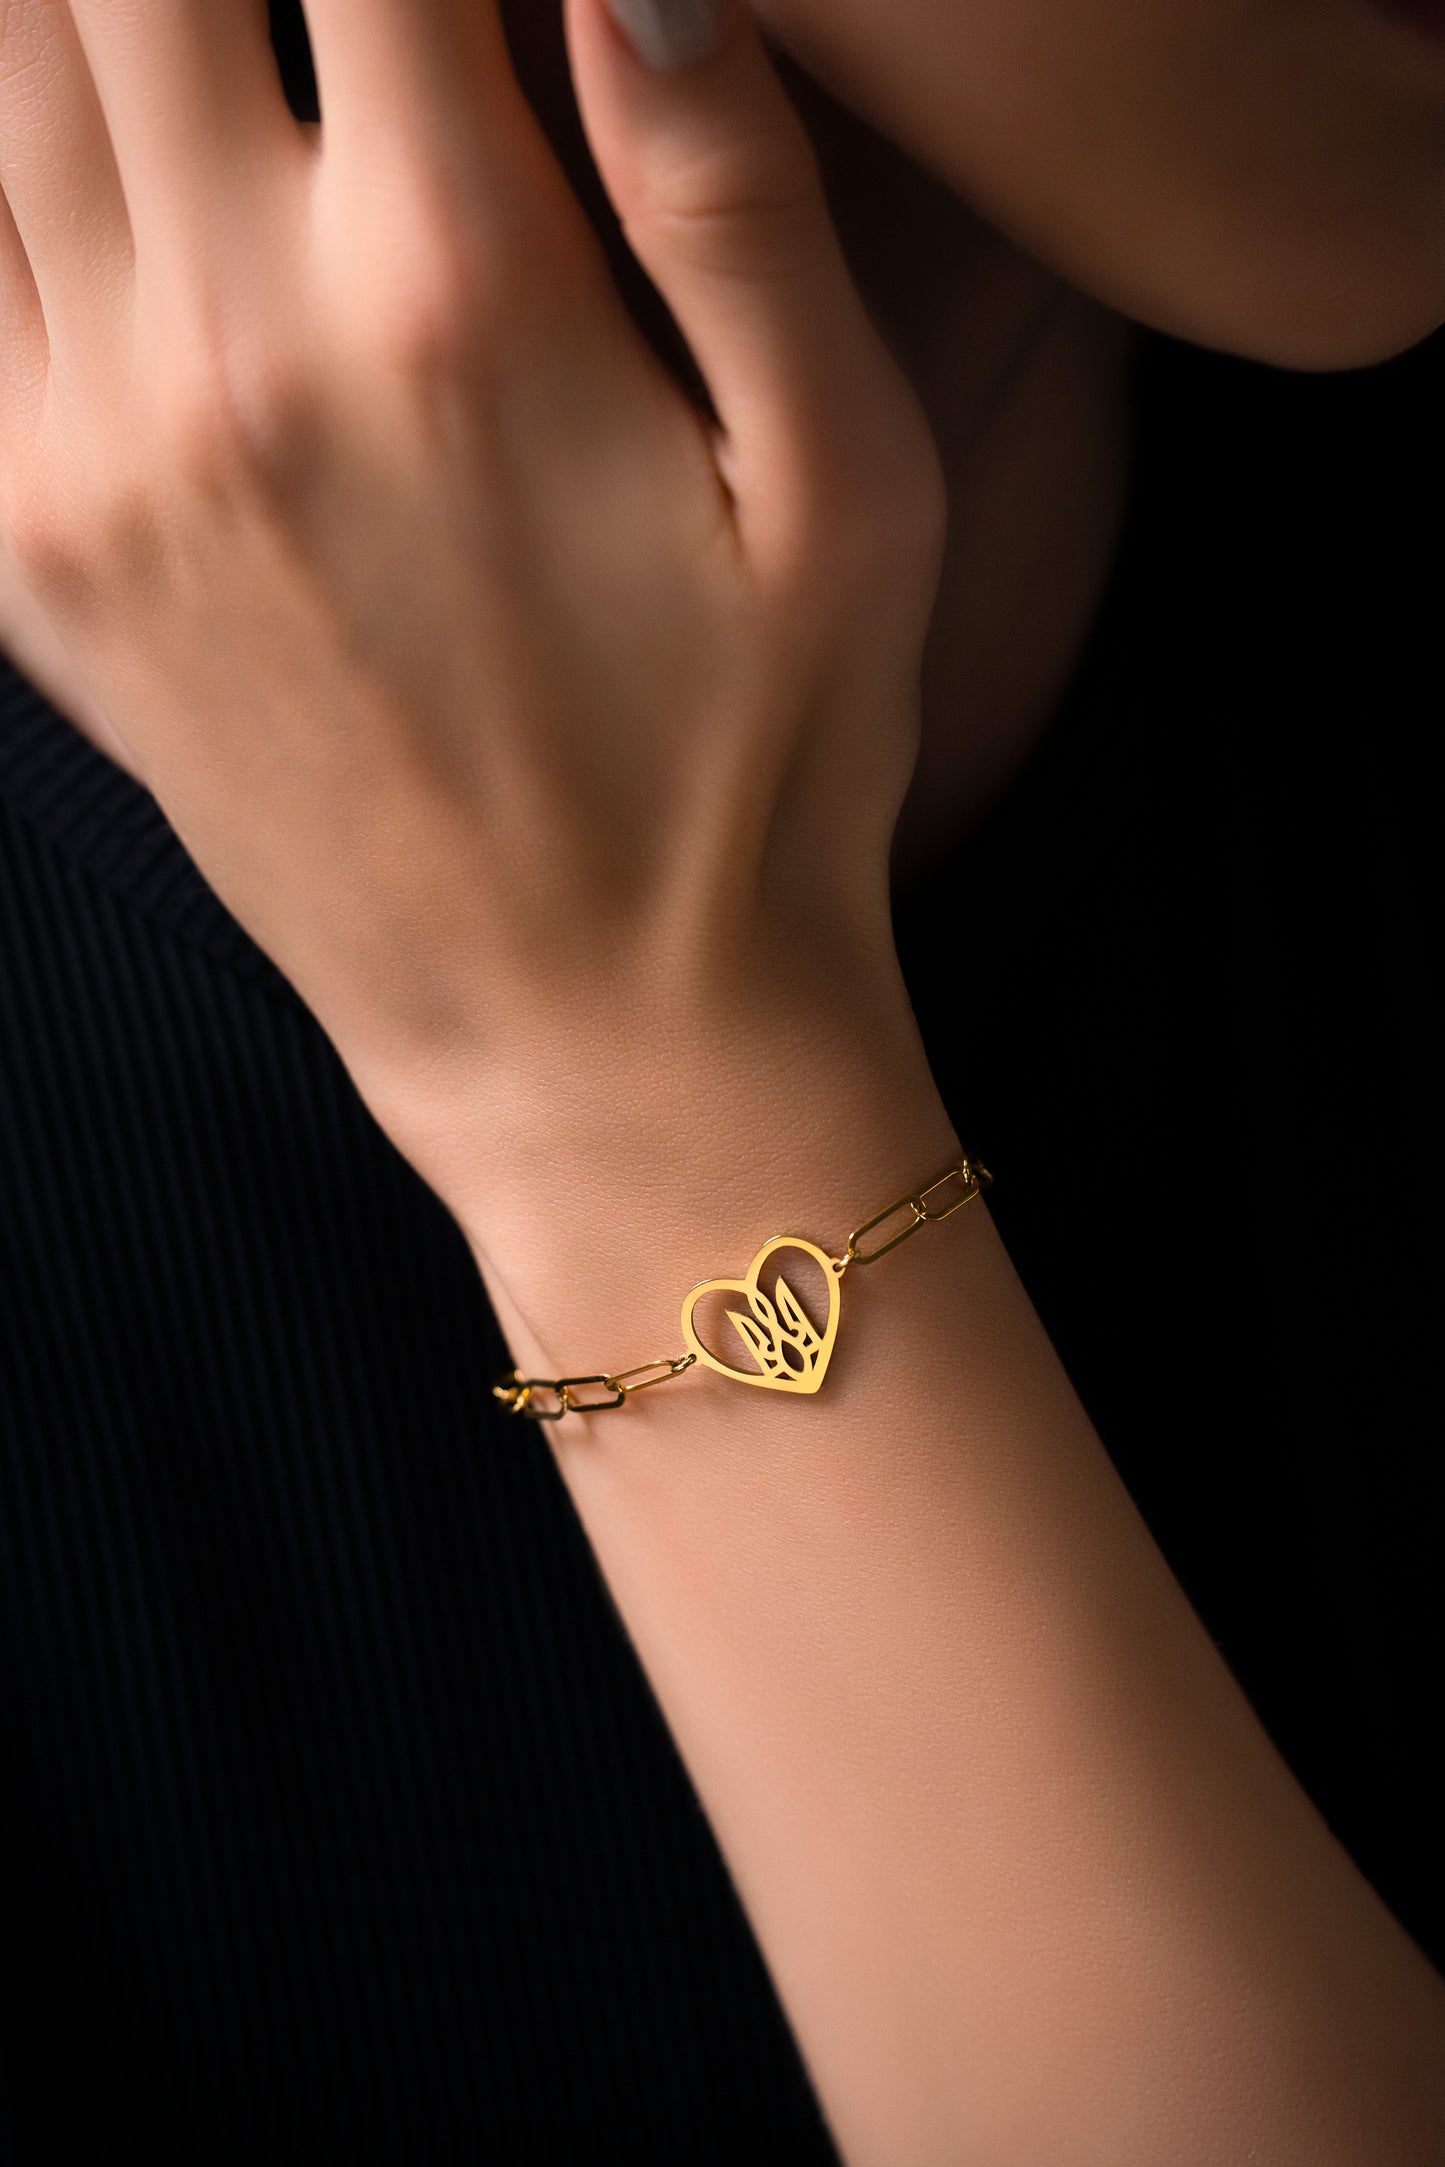 Bracelet with Trident in Heart